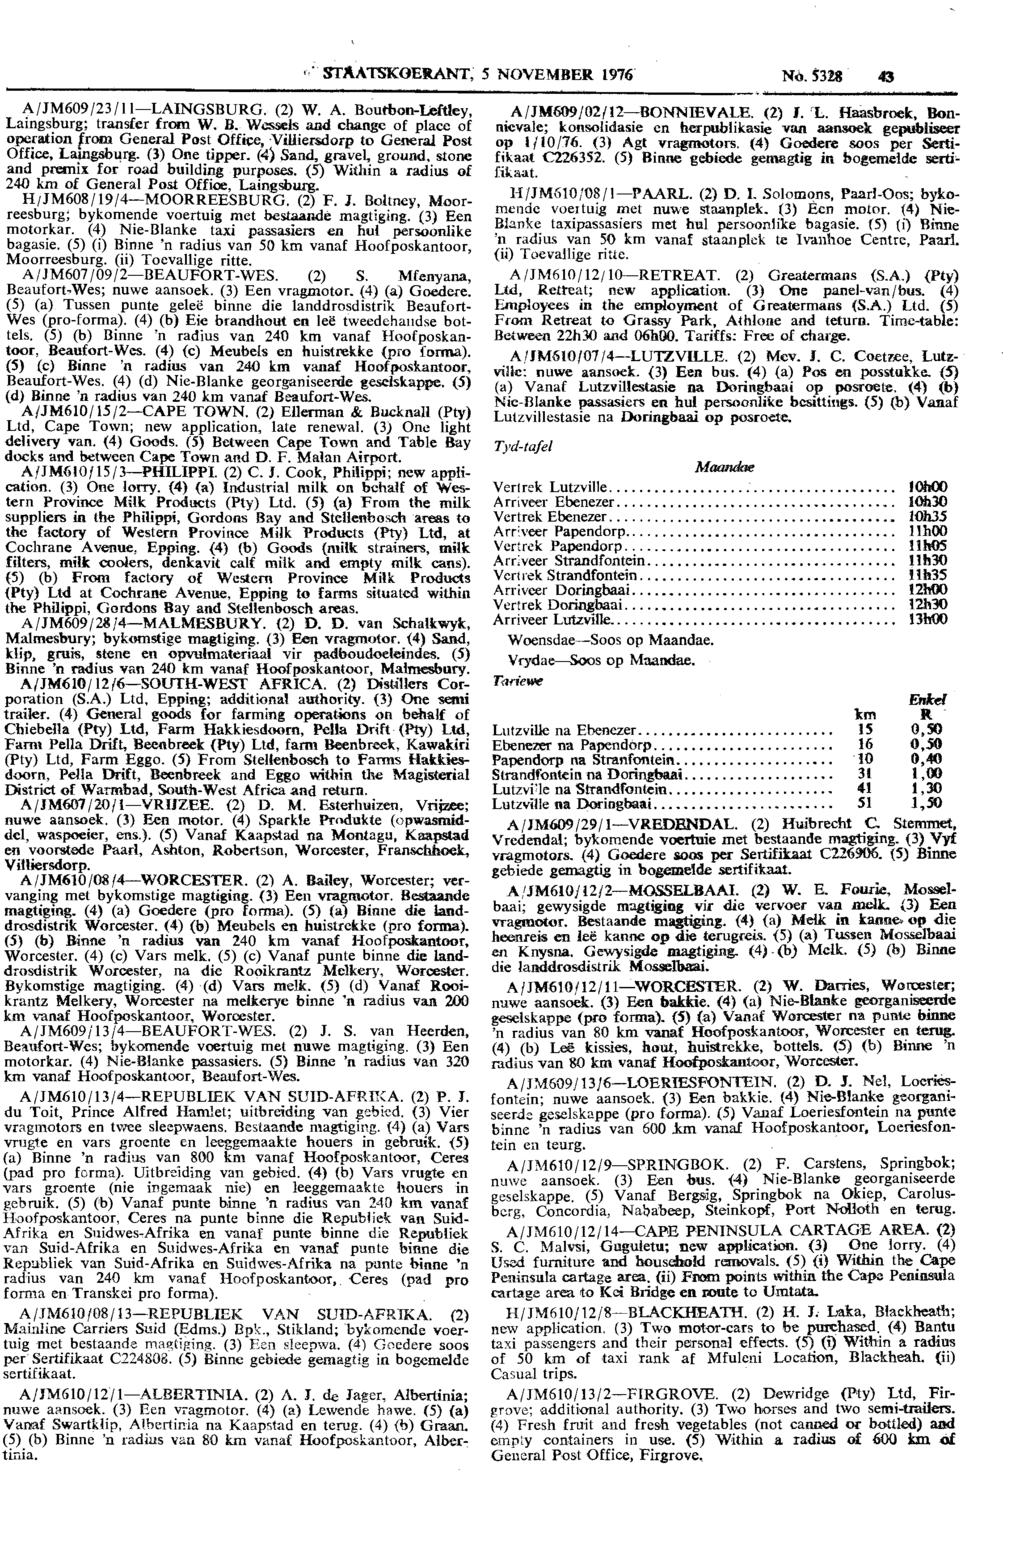 Reproduced by abinet Online in terms of Government Printer s Copyright Authority No. 10505 dated 02 February 1998 TAATKOERANT; 5 NOVEMBER 1976 No.3!8 43 ~/JM609/23/11-LAINGBURG. (2) W. A. Boutbon-Leftley, Lamgsburg; transfer from W.